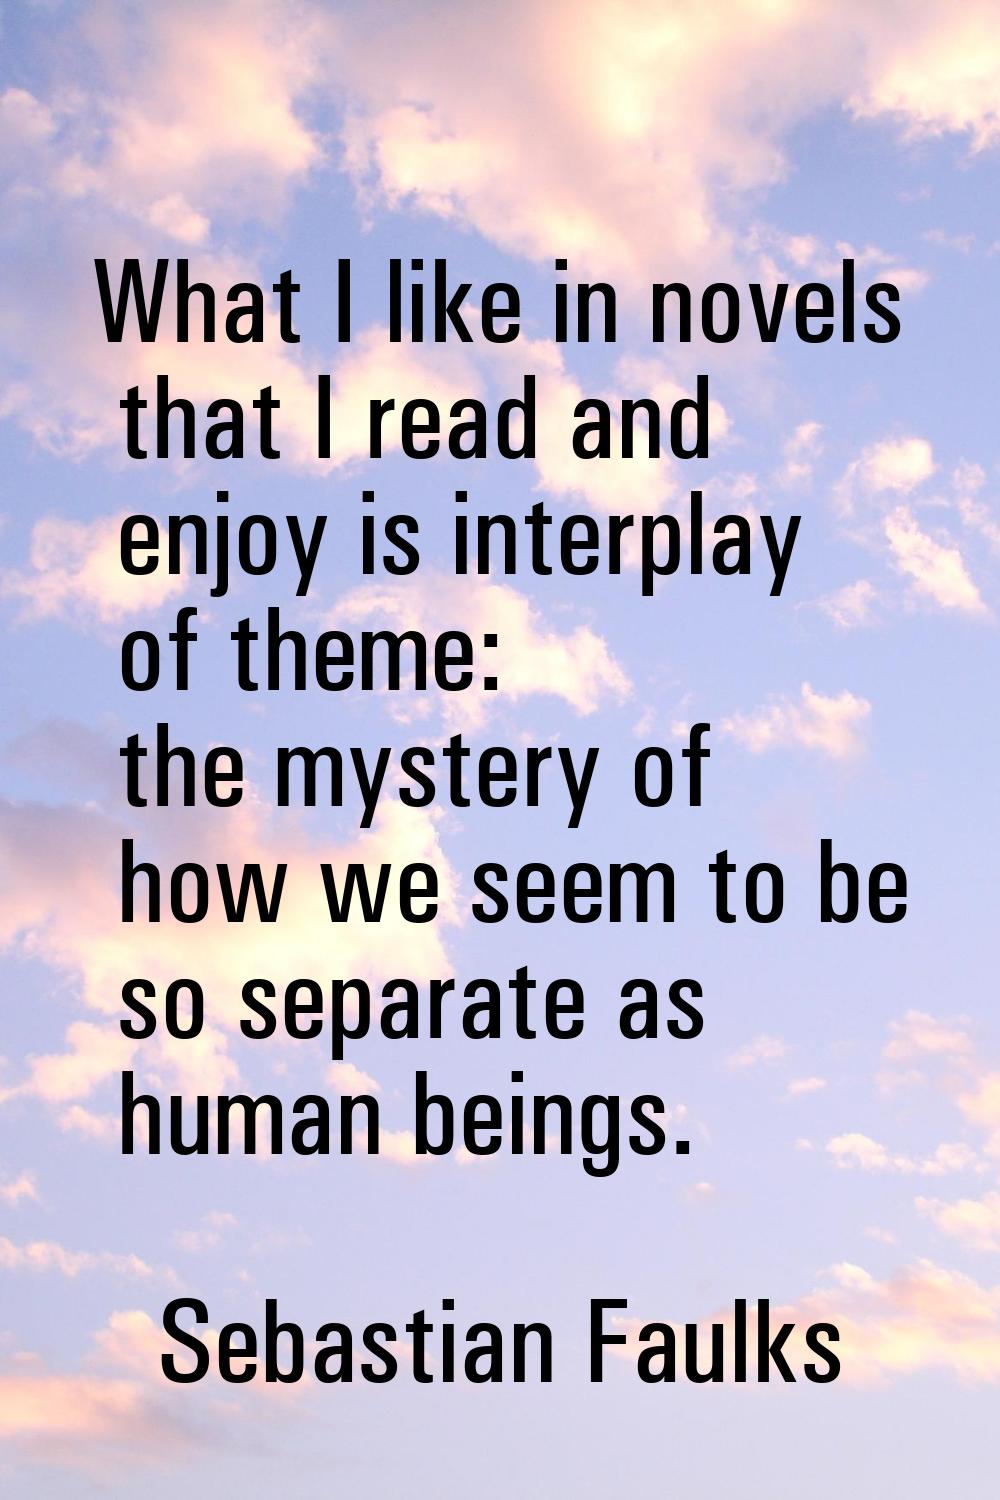 What I like in novels that I read and enjoy is interplay of theme: the mystery of how we seem to be